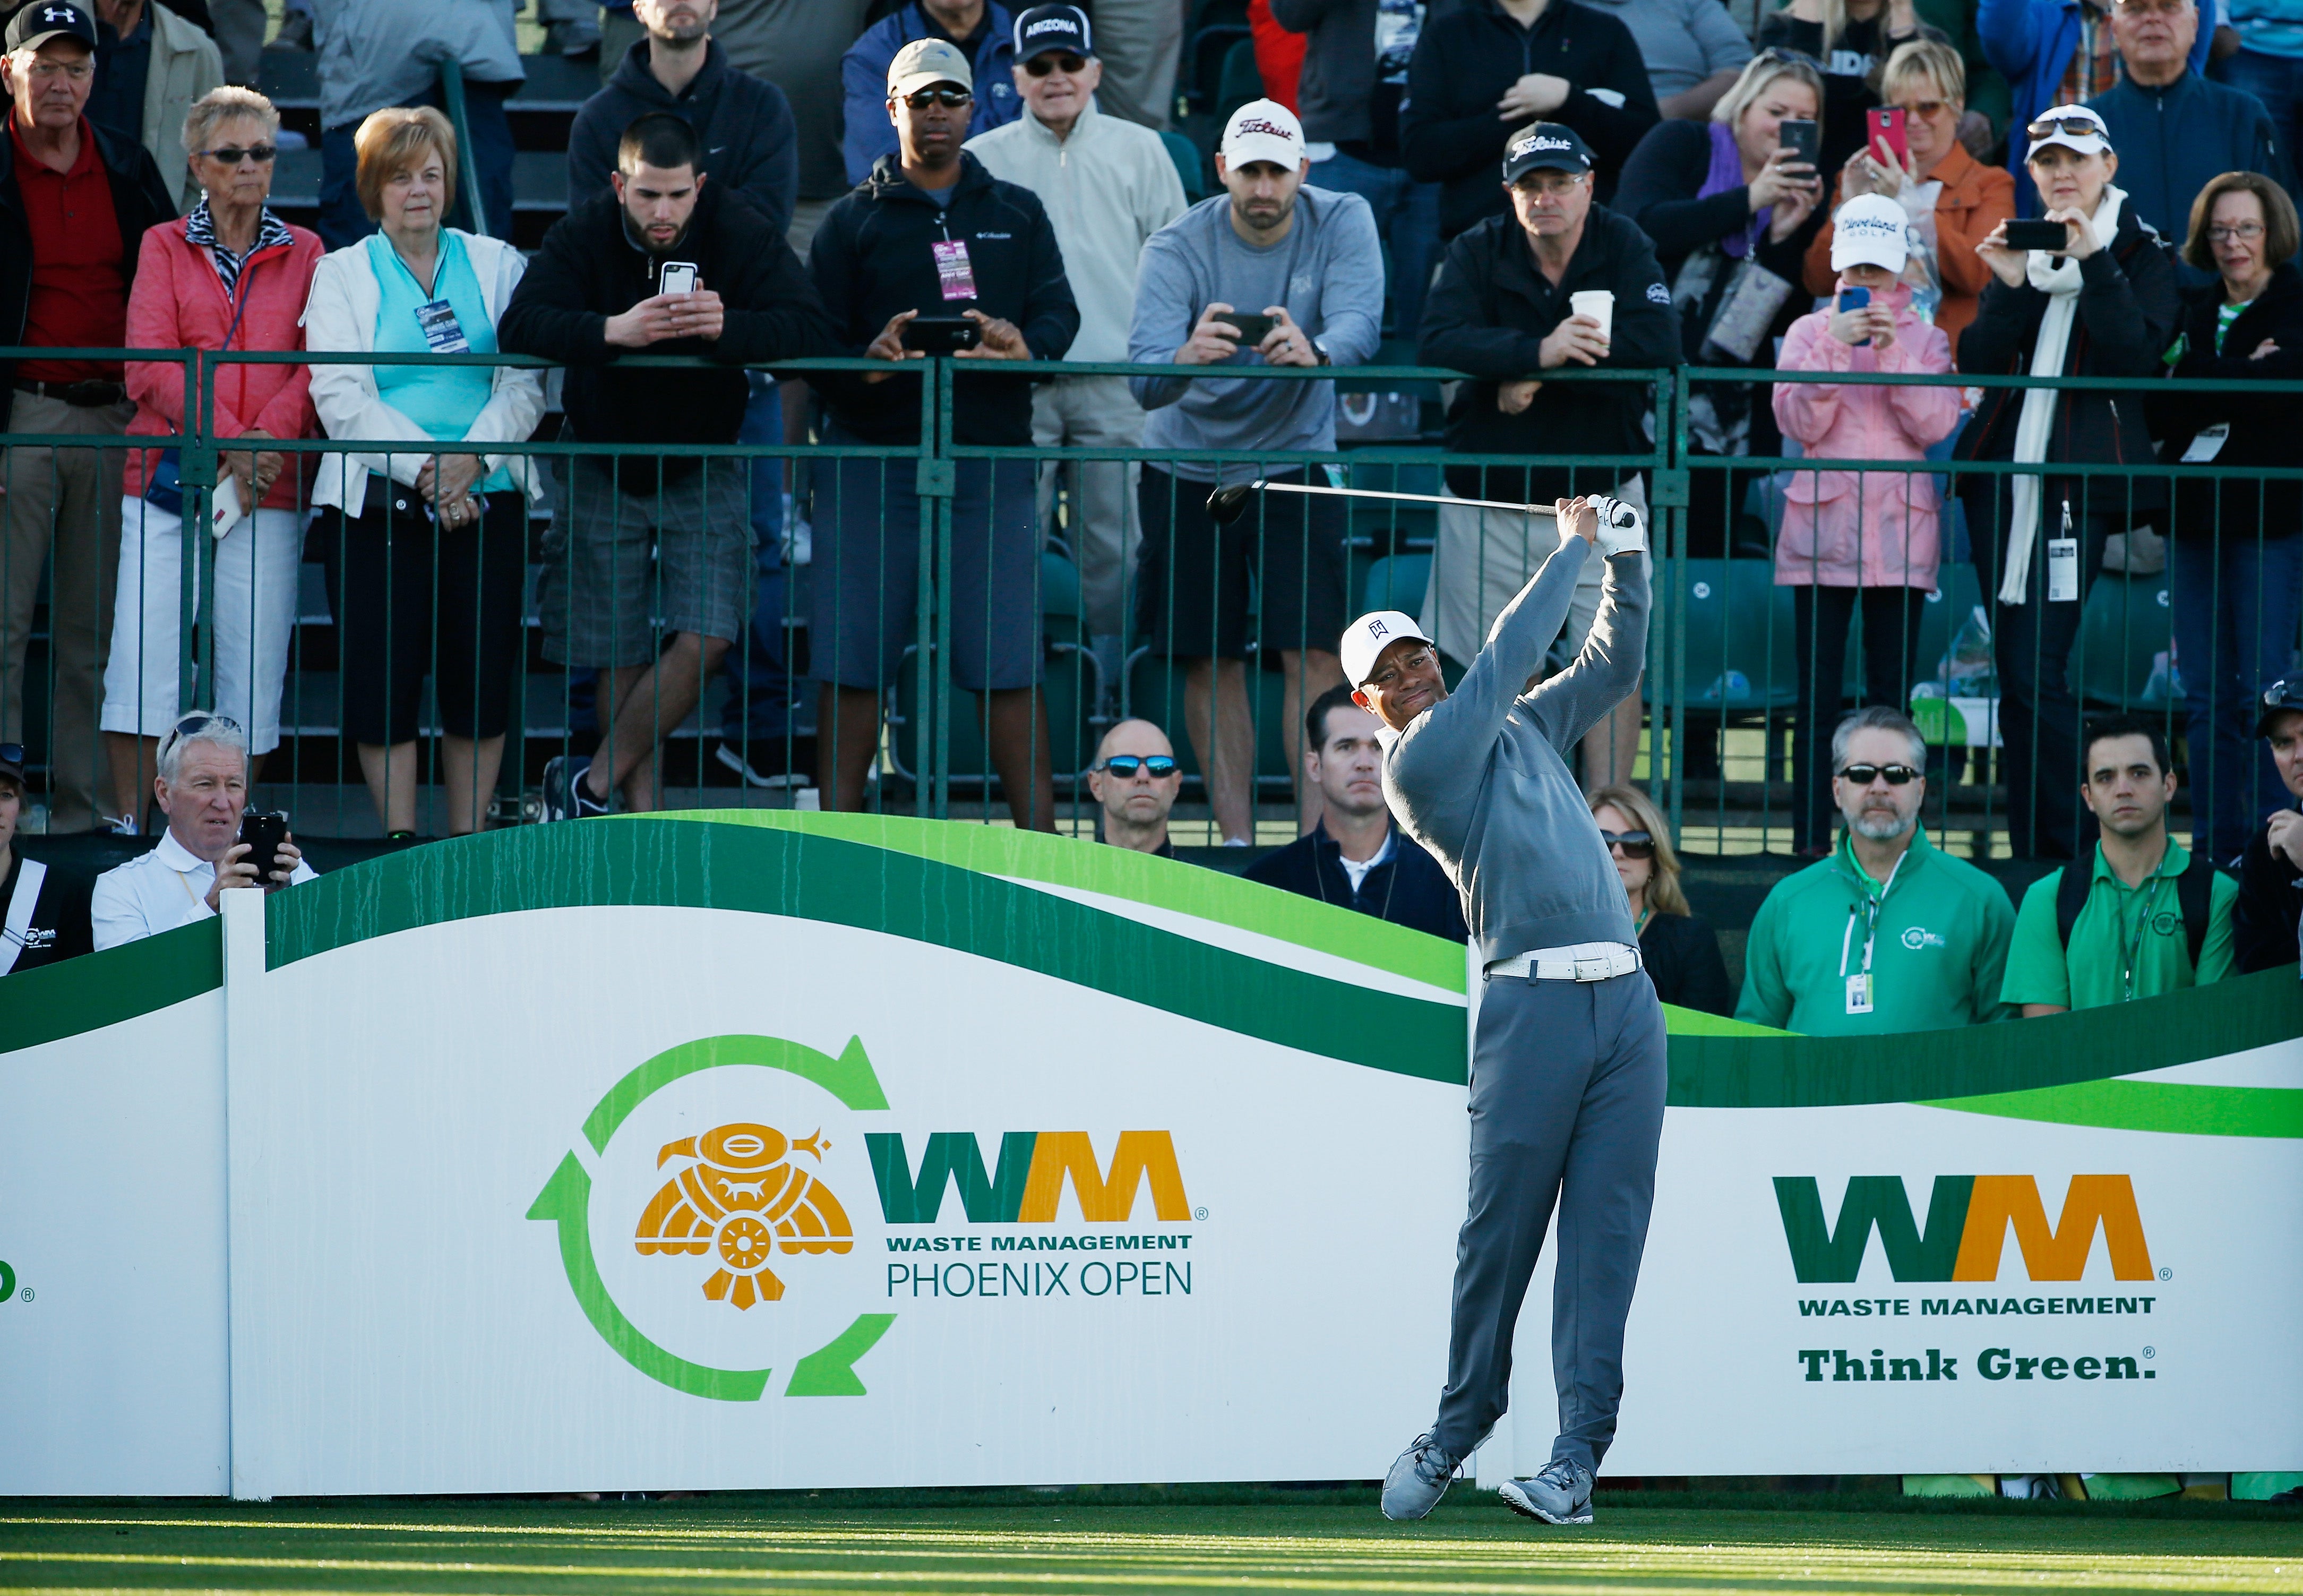 Tiger Woods Booed Then Cheered at 16th Hole During Phoenix Open Pro-Am